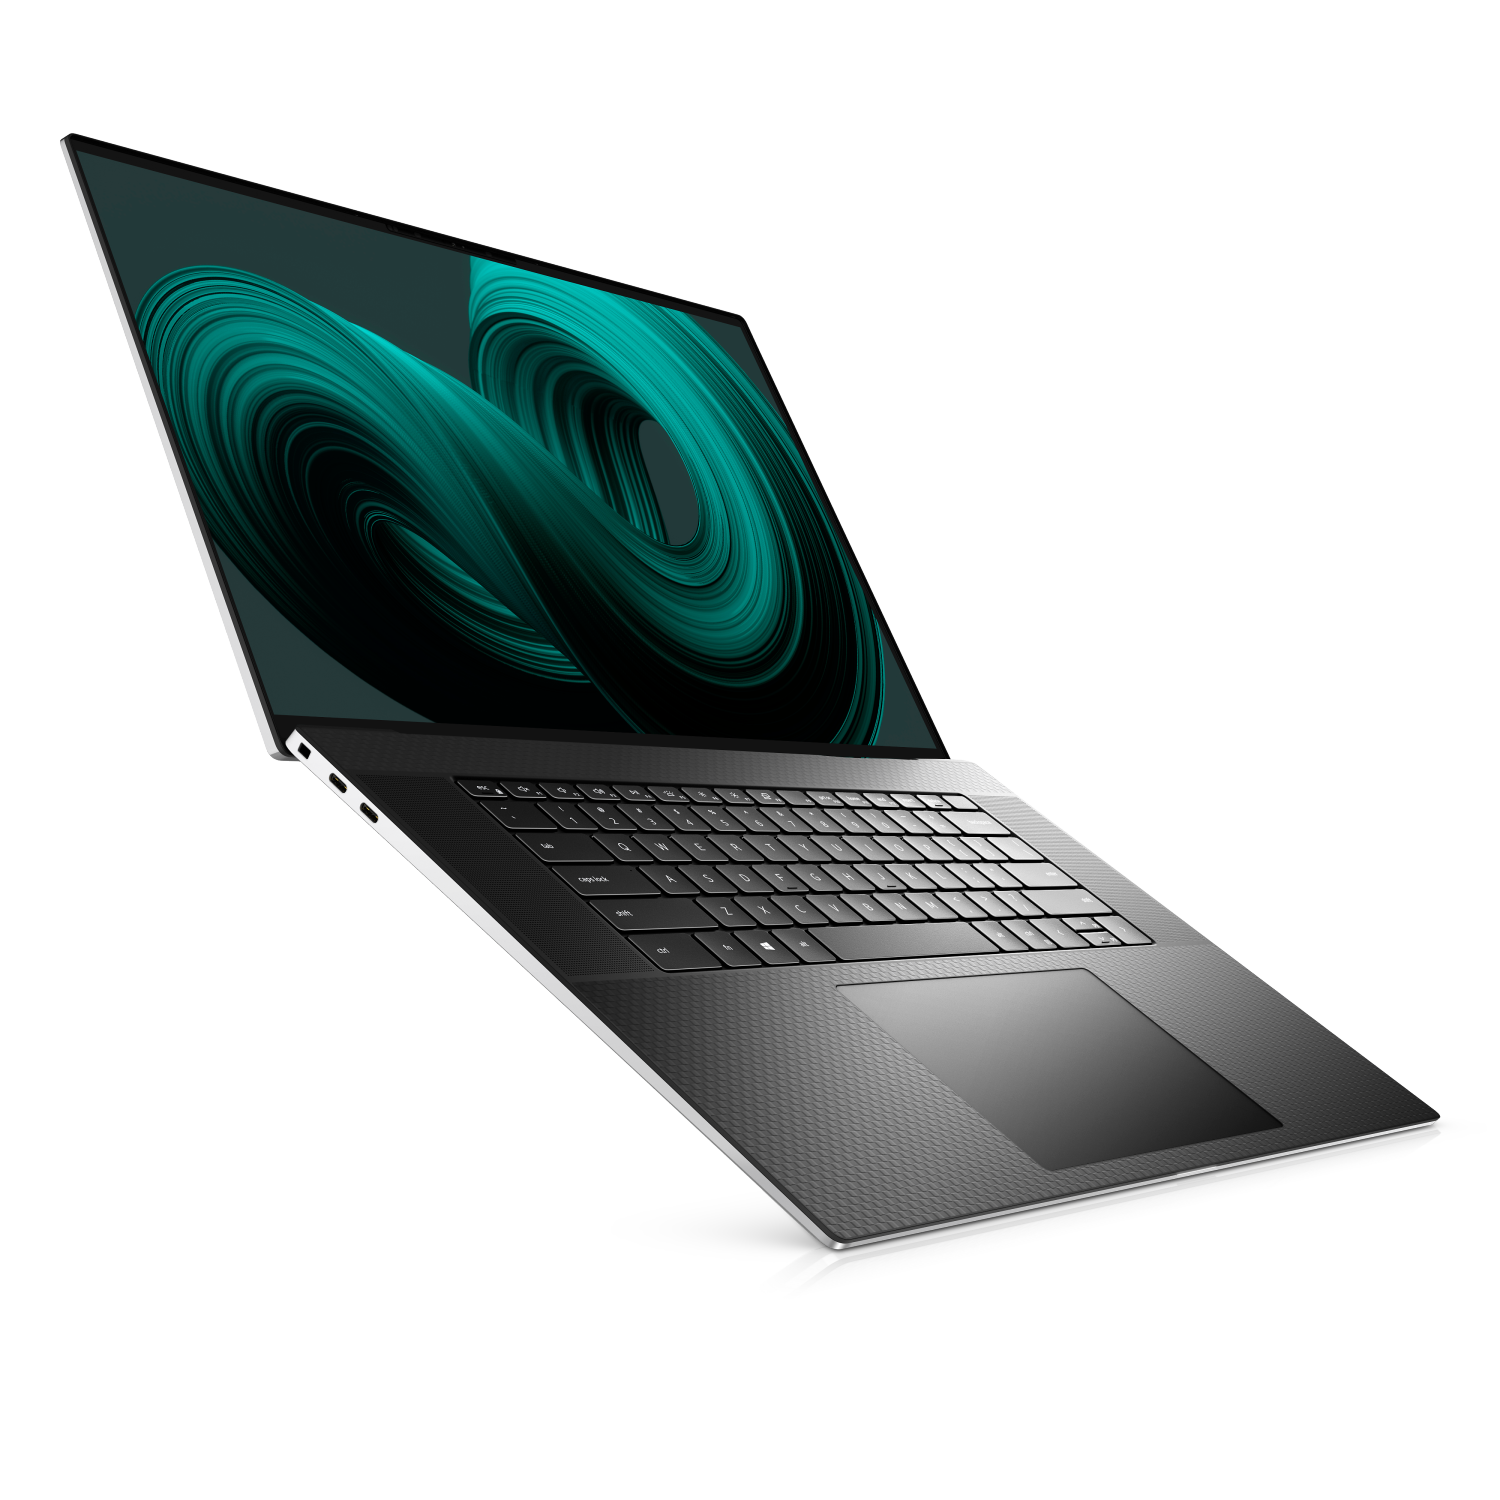 Refurbished (Excellent) - Dell XPS 17 9710 Laptop (2021) | 17" FHD+ | Core i5 - 1TB SSD - 16GB RAM | 6 Cores @ 4.5 GHz - 11th Gen CPU Certified Refurbished